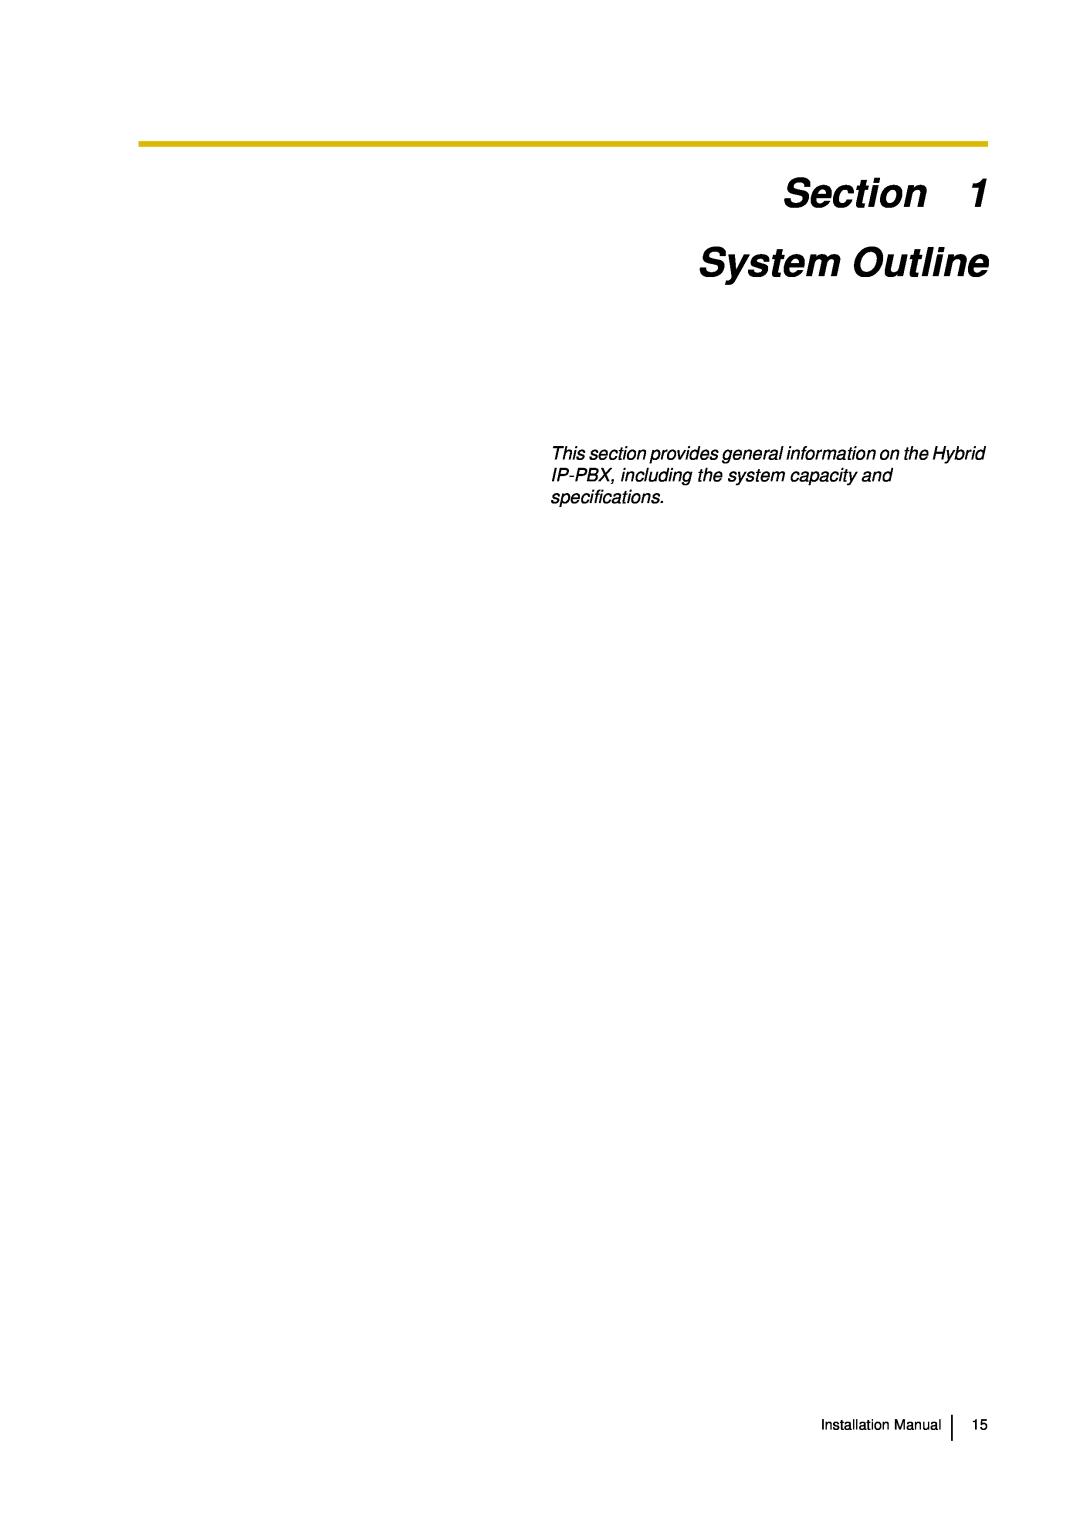 Panasonic KX-TDA30 installation manual Section System Outline, Installation Manual 